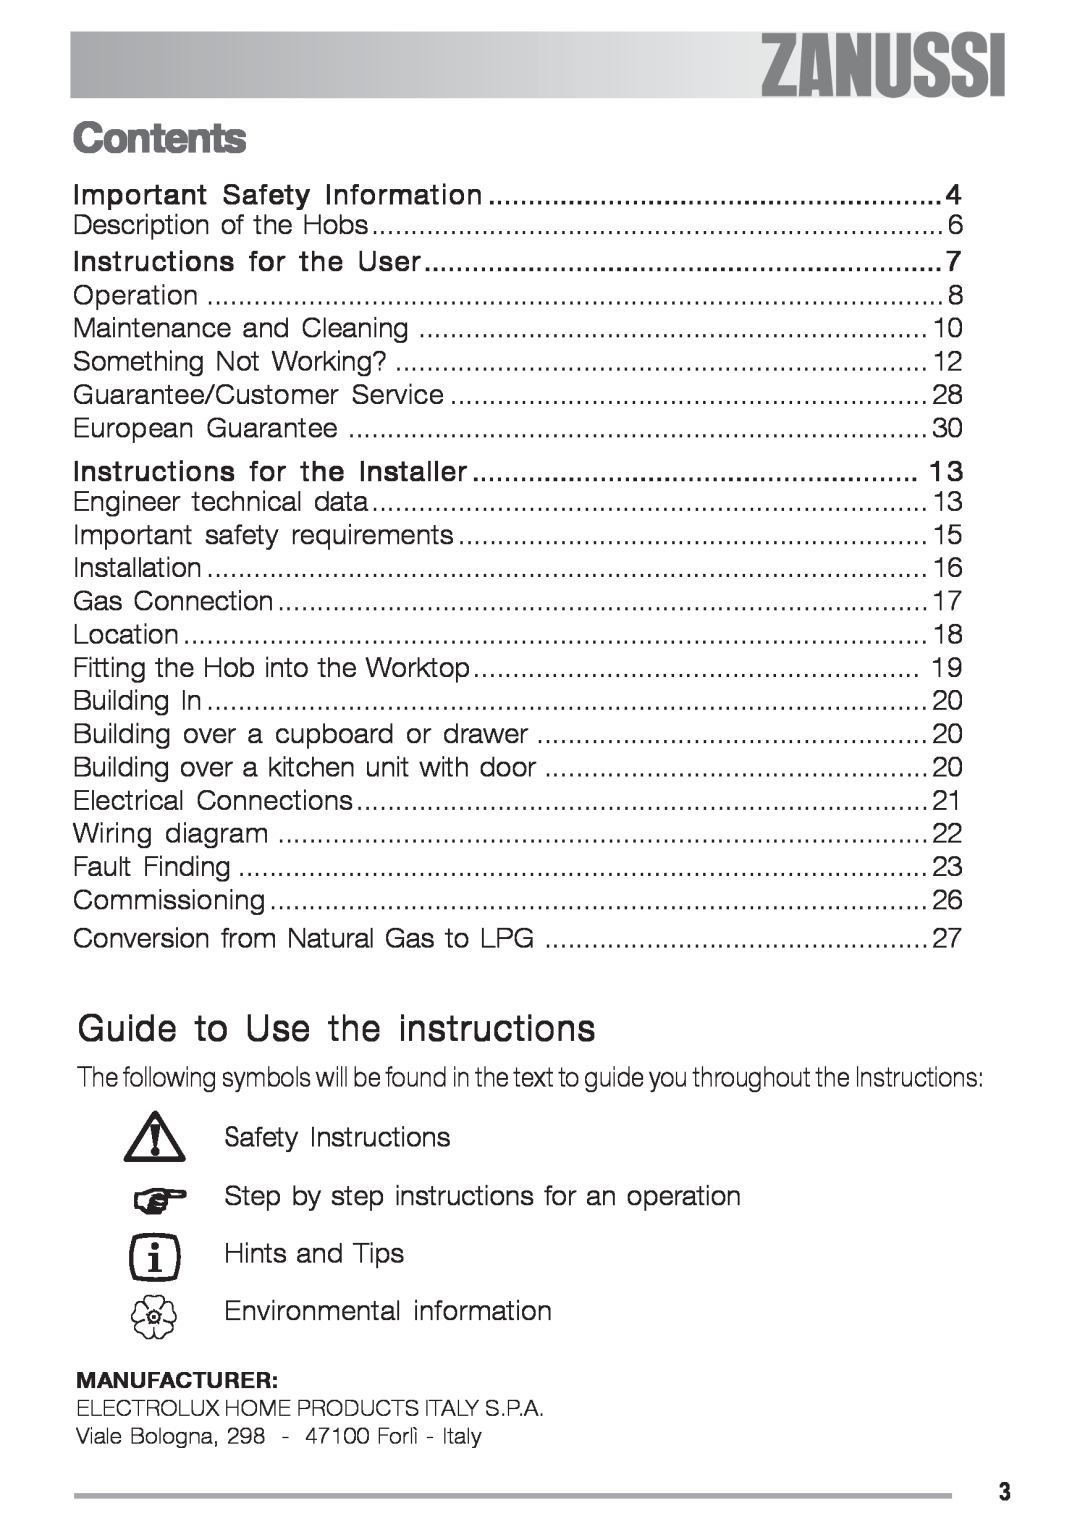 Zanussi ZGF 692 CT manual Contents, Guide to Use the instructions 